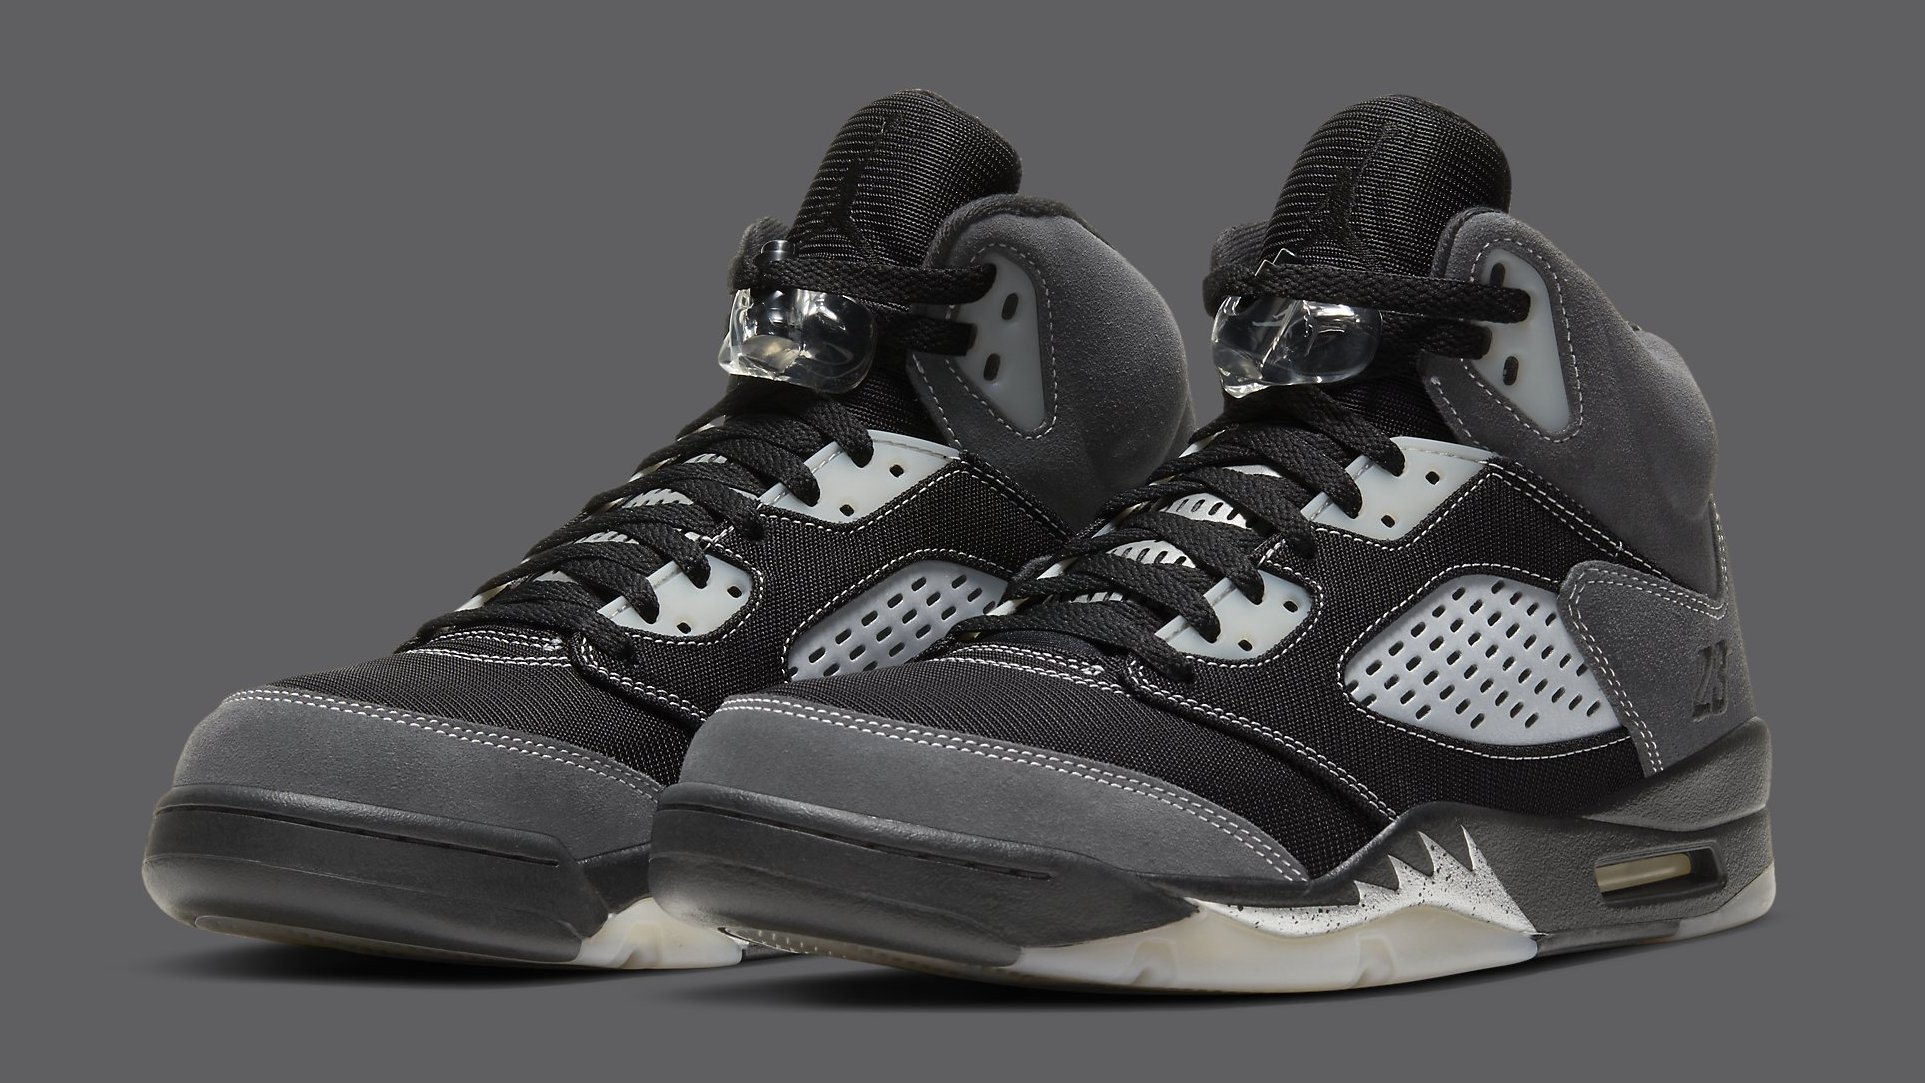 Best Look Yet at the 'Anthracite' Air Jordan 5 | Complex